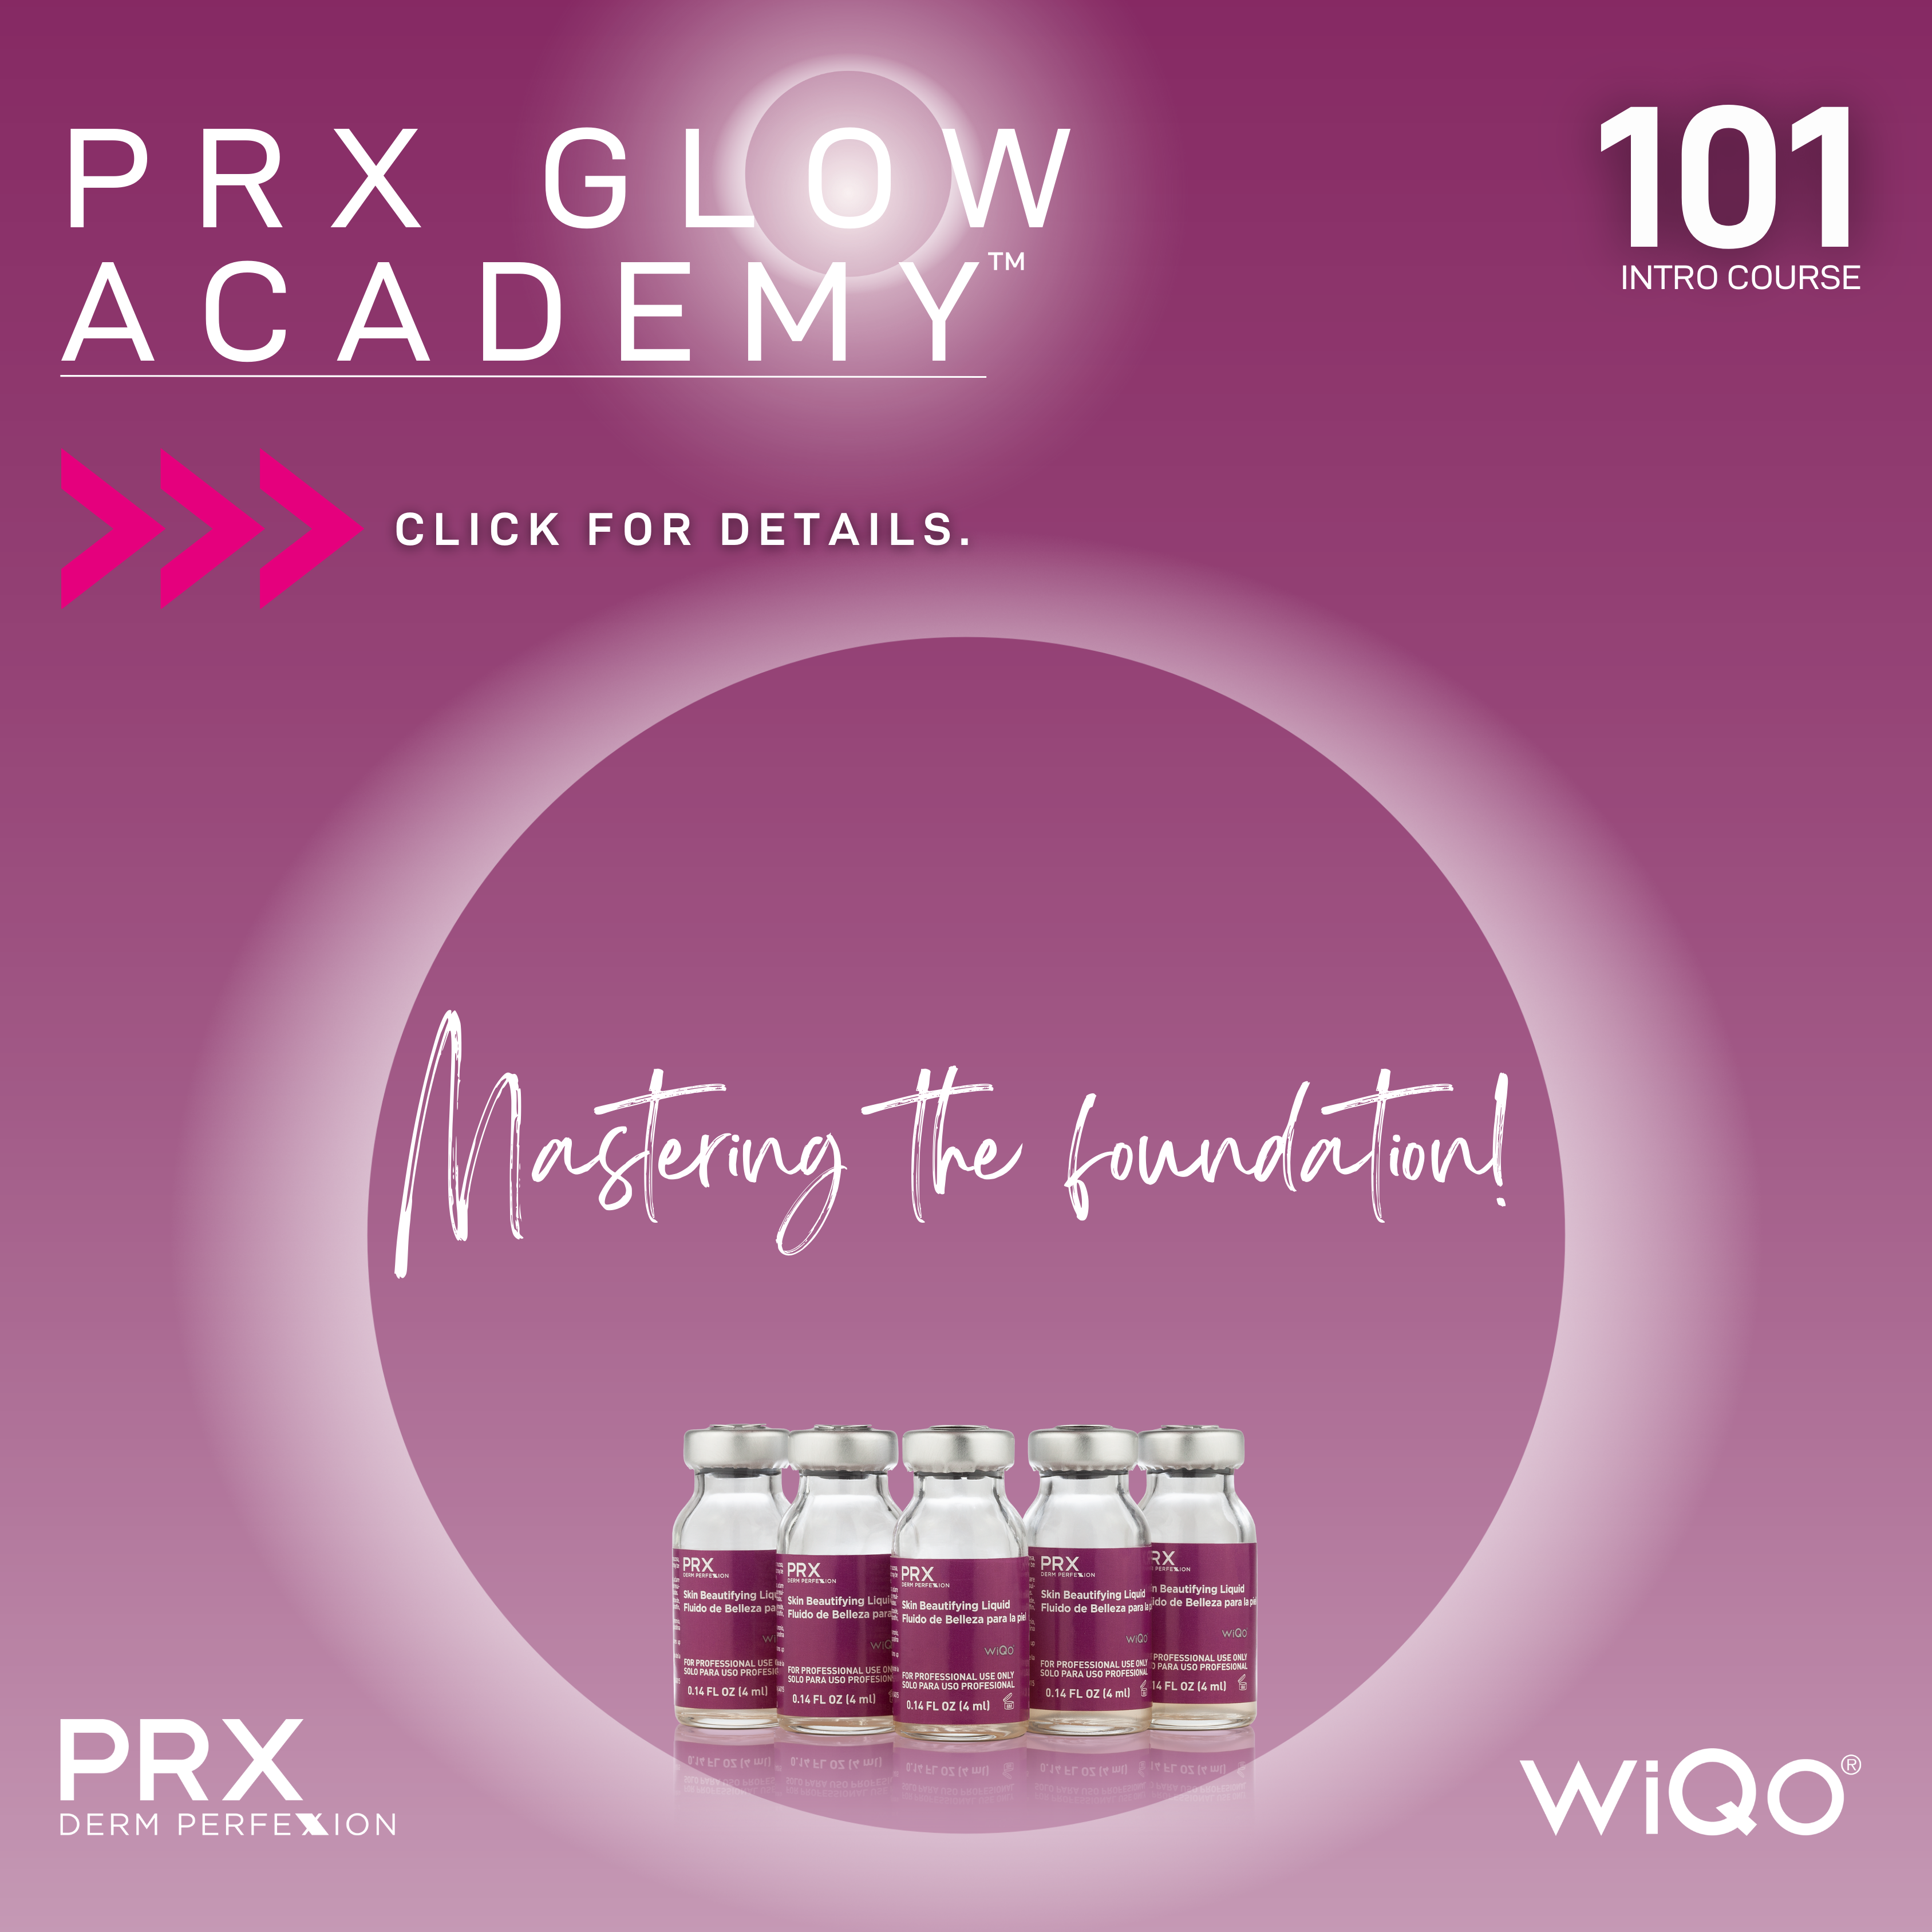 TRAINING: PRX GLOW ACADEMY 101 INTRO COURSE | MASTERING THE FOUNDATION